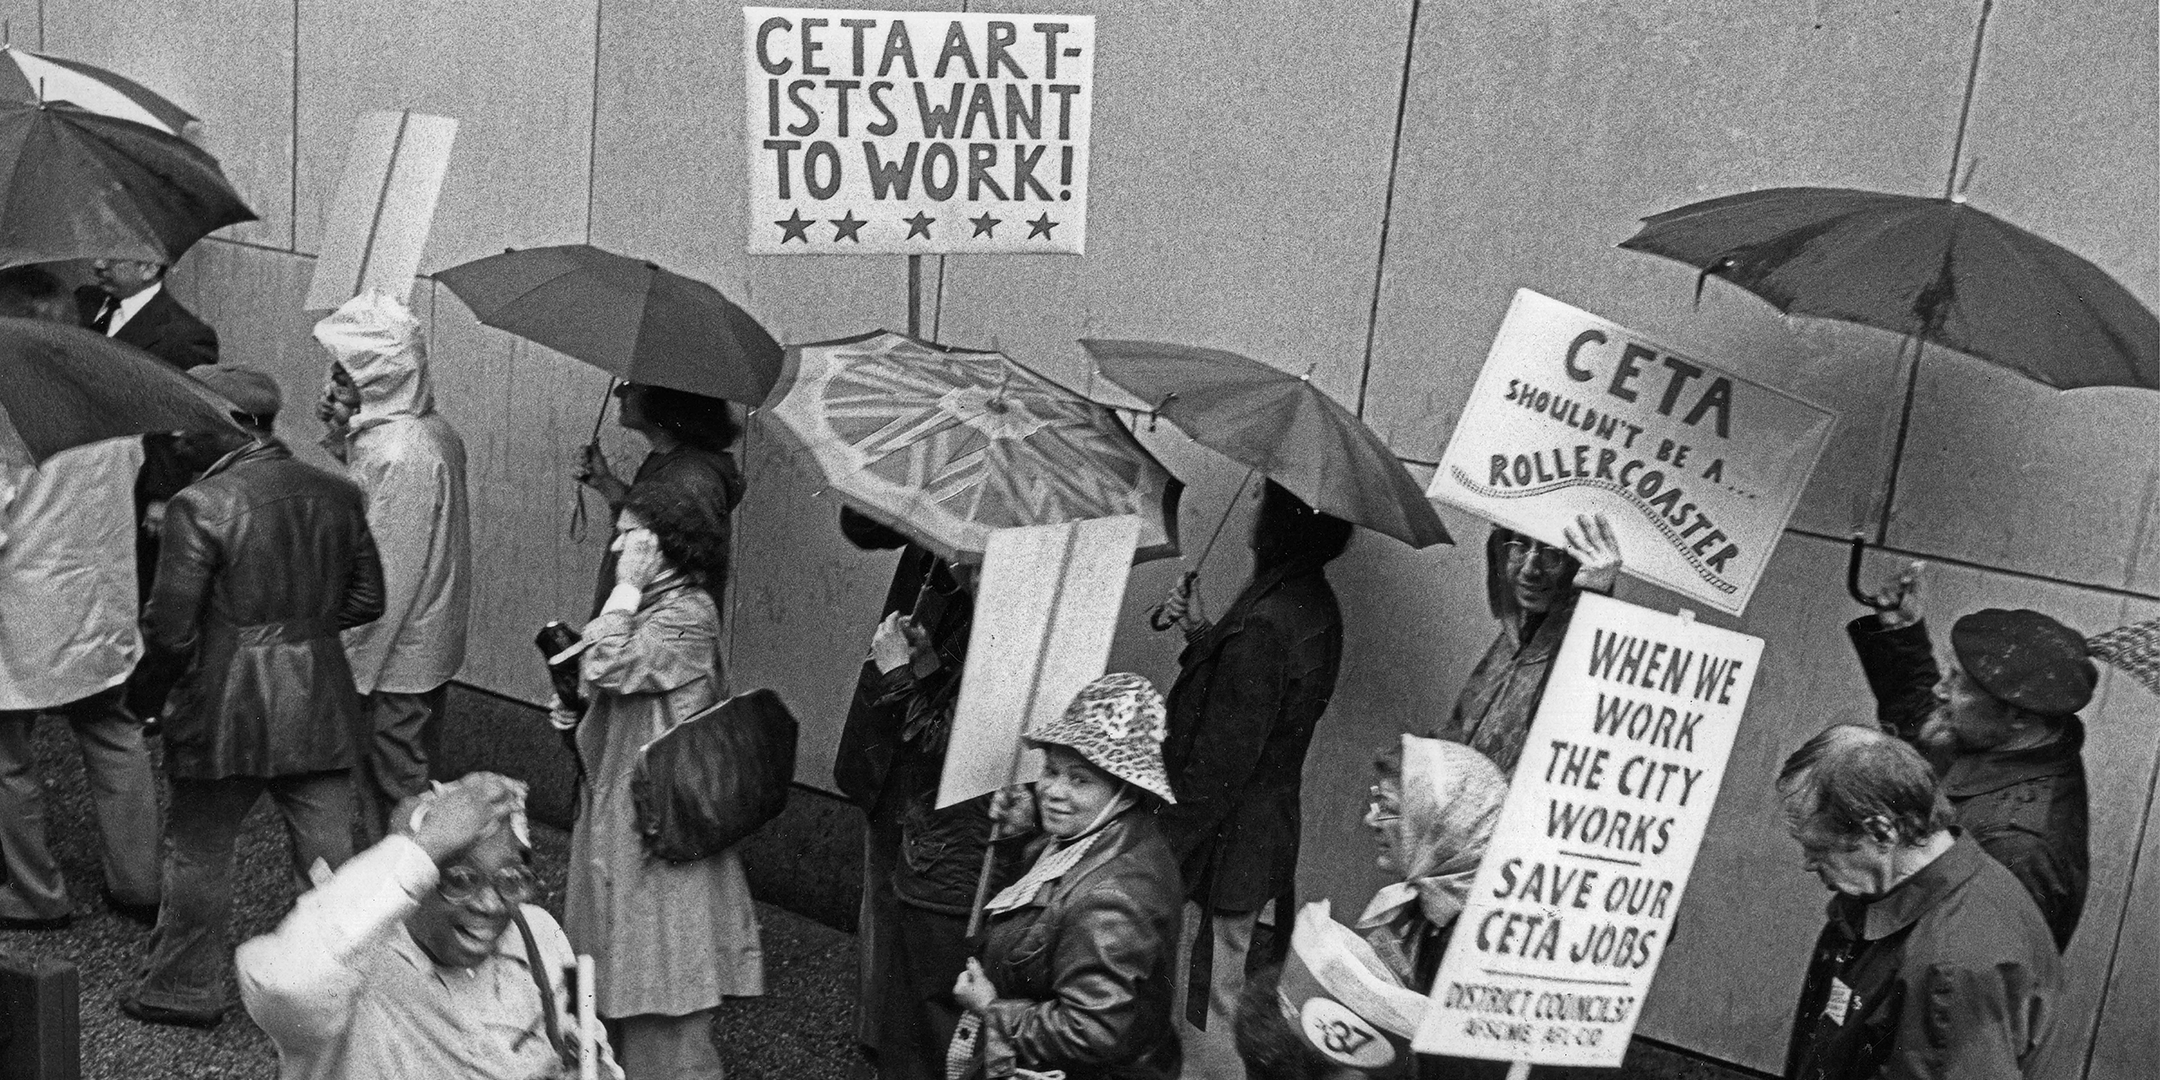 People marching holding umbrellas and signs during CETA protest to save artists jobs